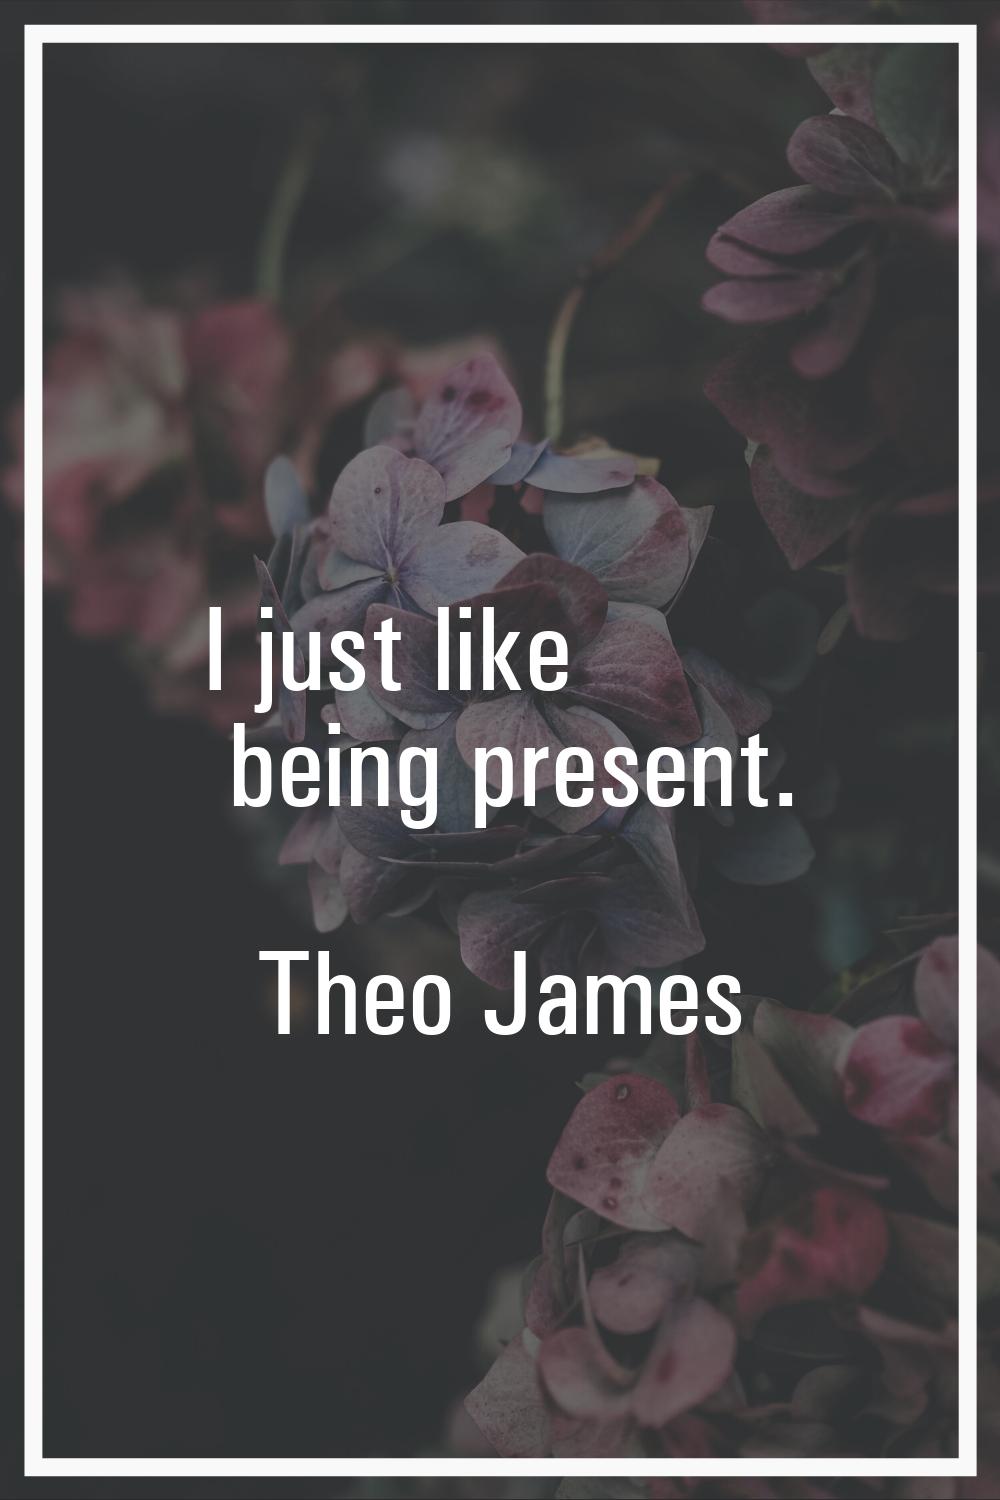 I just like being present.